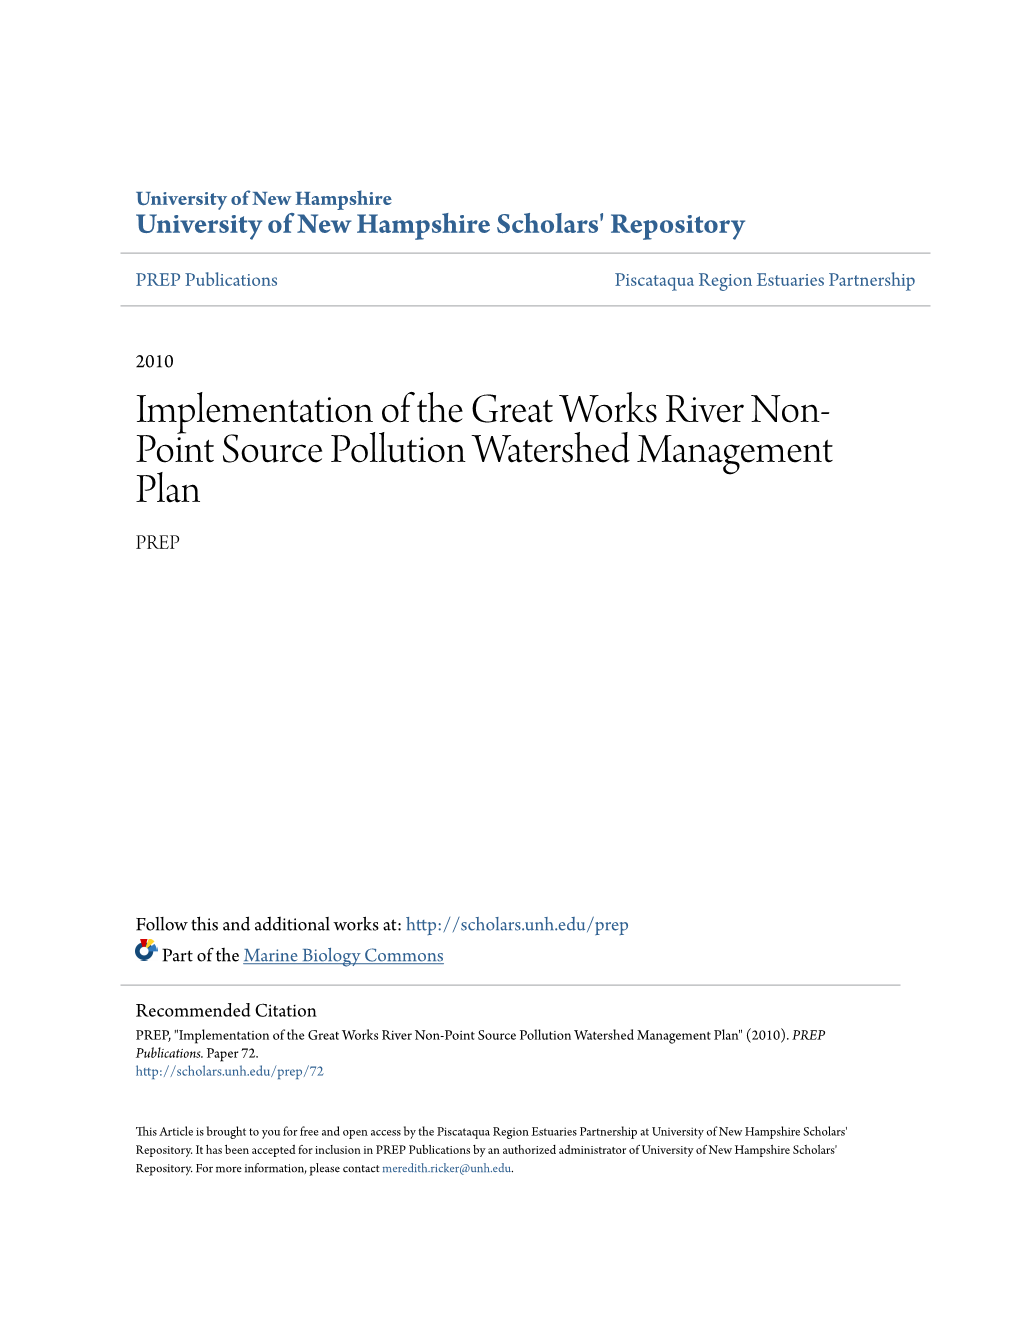 Implementation of the Great Works River Non-Point Source Pollution Watershed Management Plan" (2010)